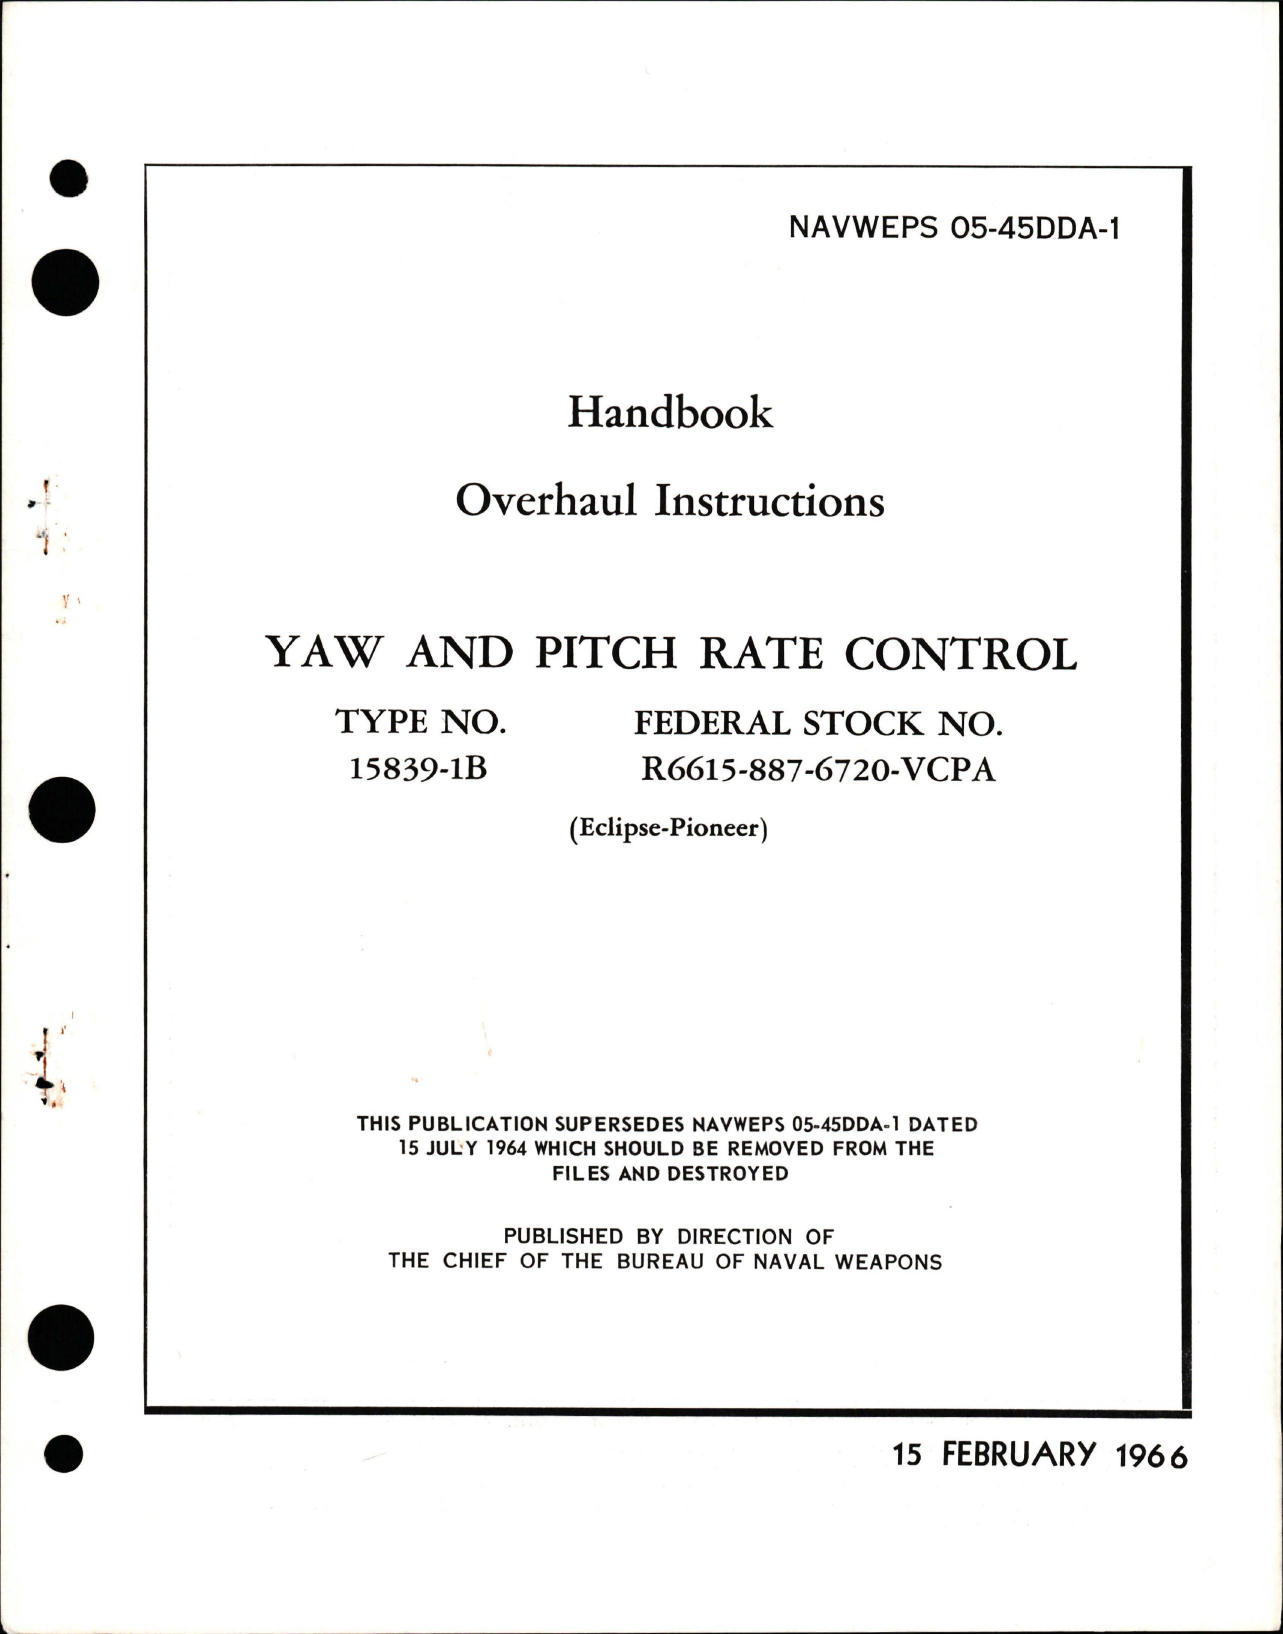 Sample page 1 from AirCorps Library document: Overhaul Instructions for Yaw and Pitch Rate Control - Type 15839-1B